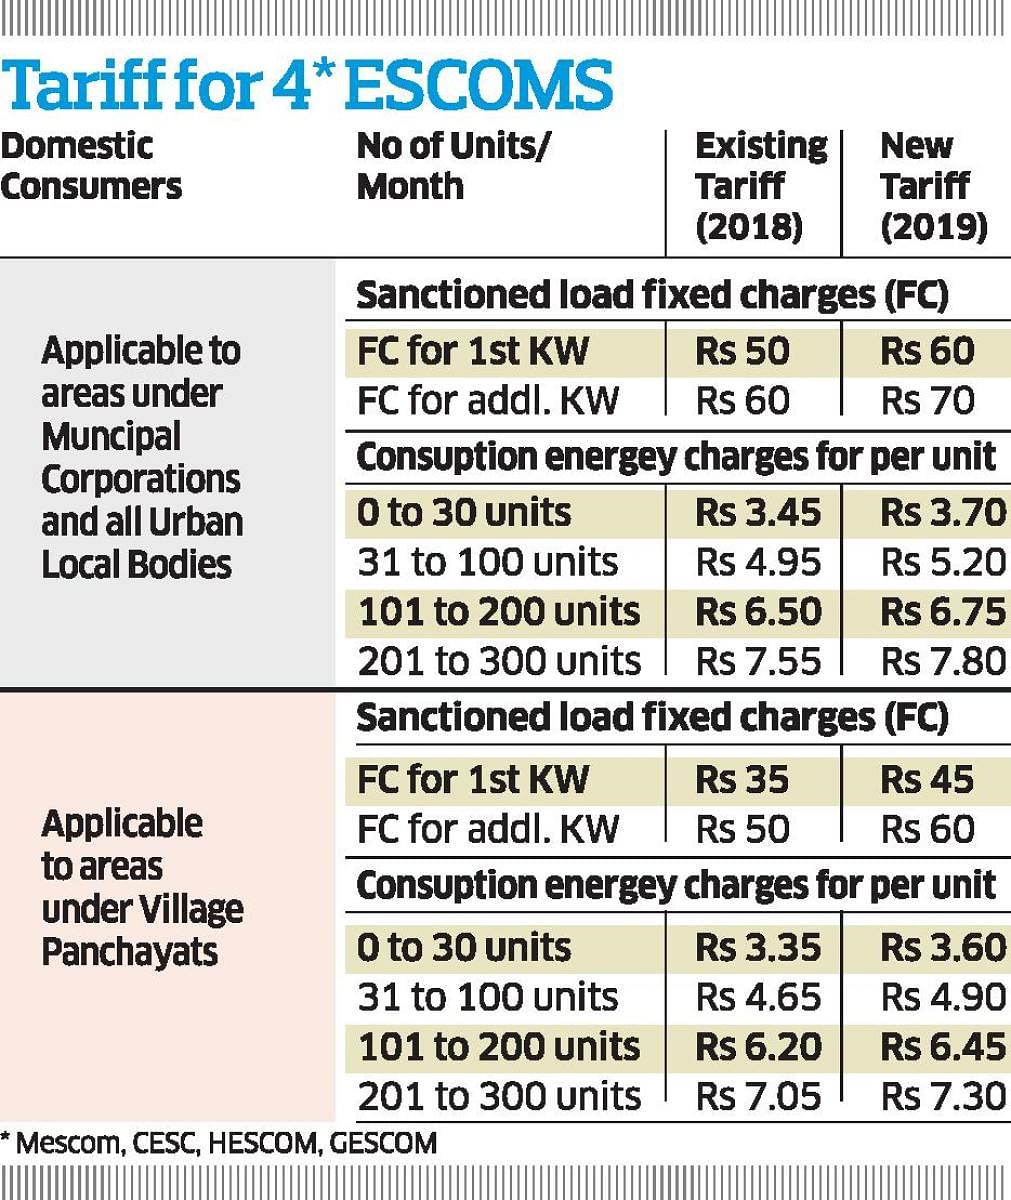 Small power tariff hike for industry, commercial users